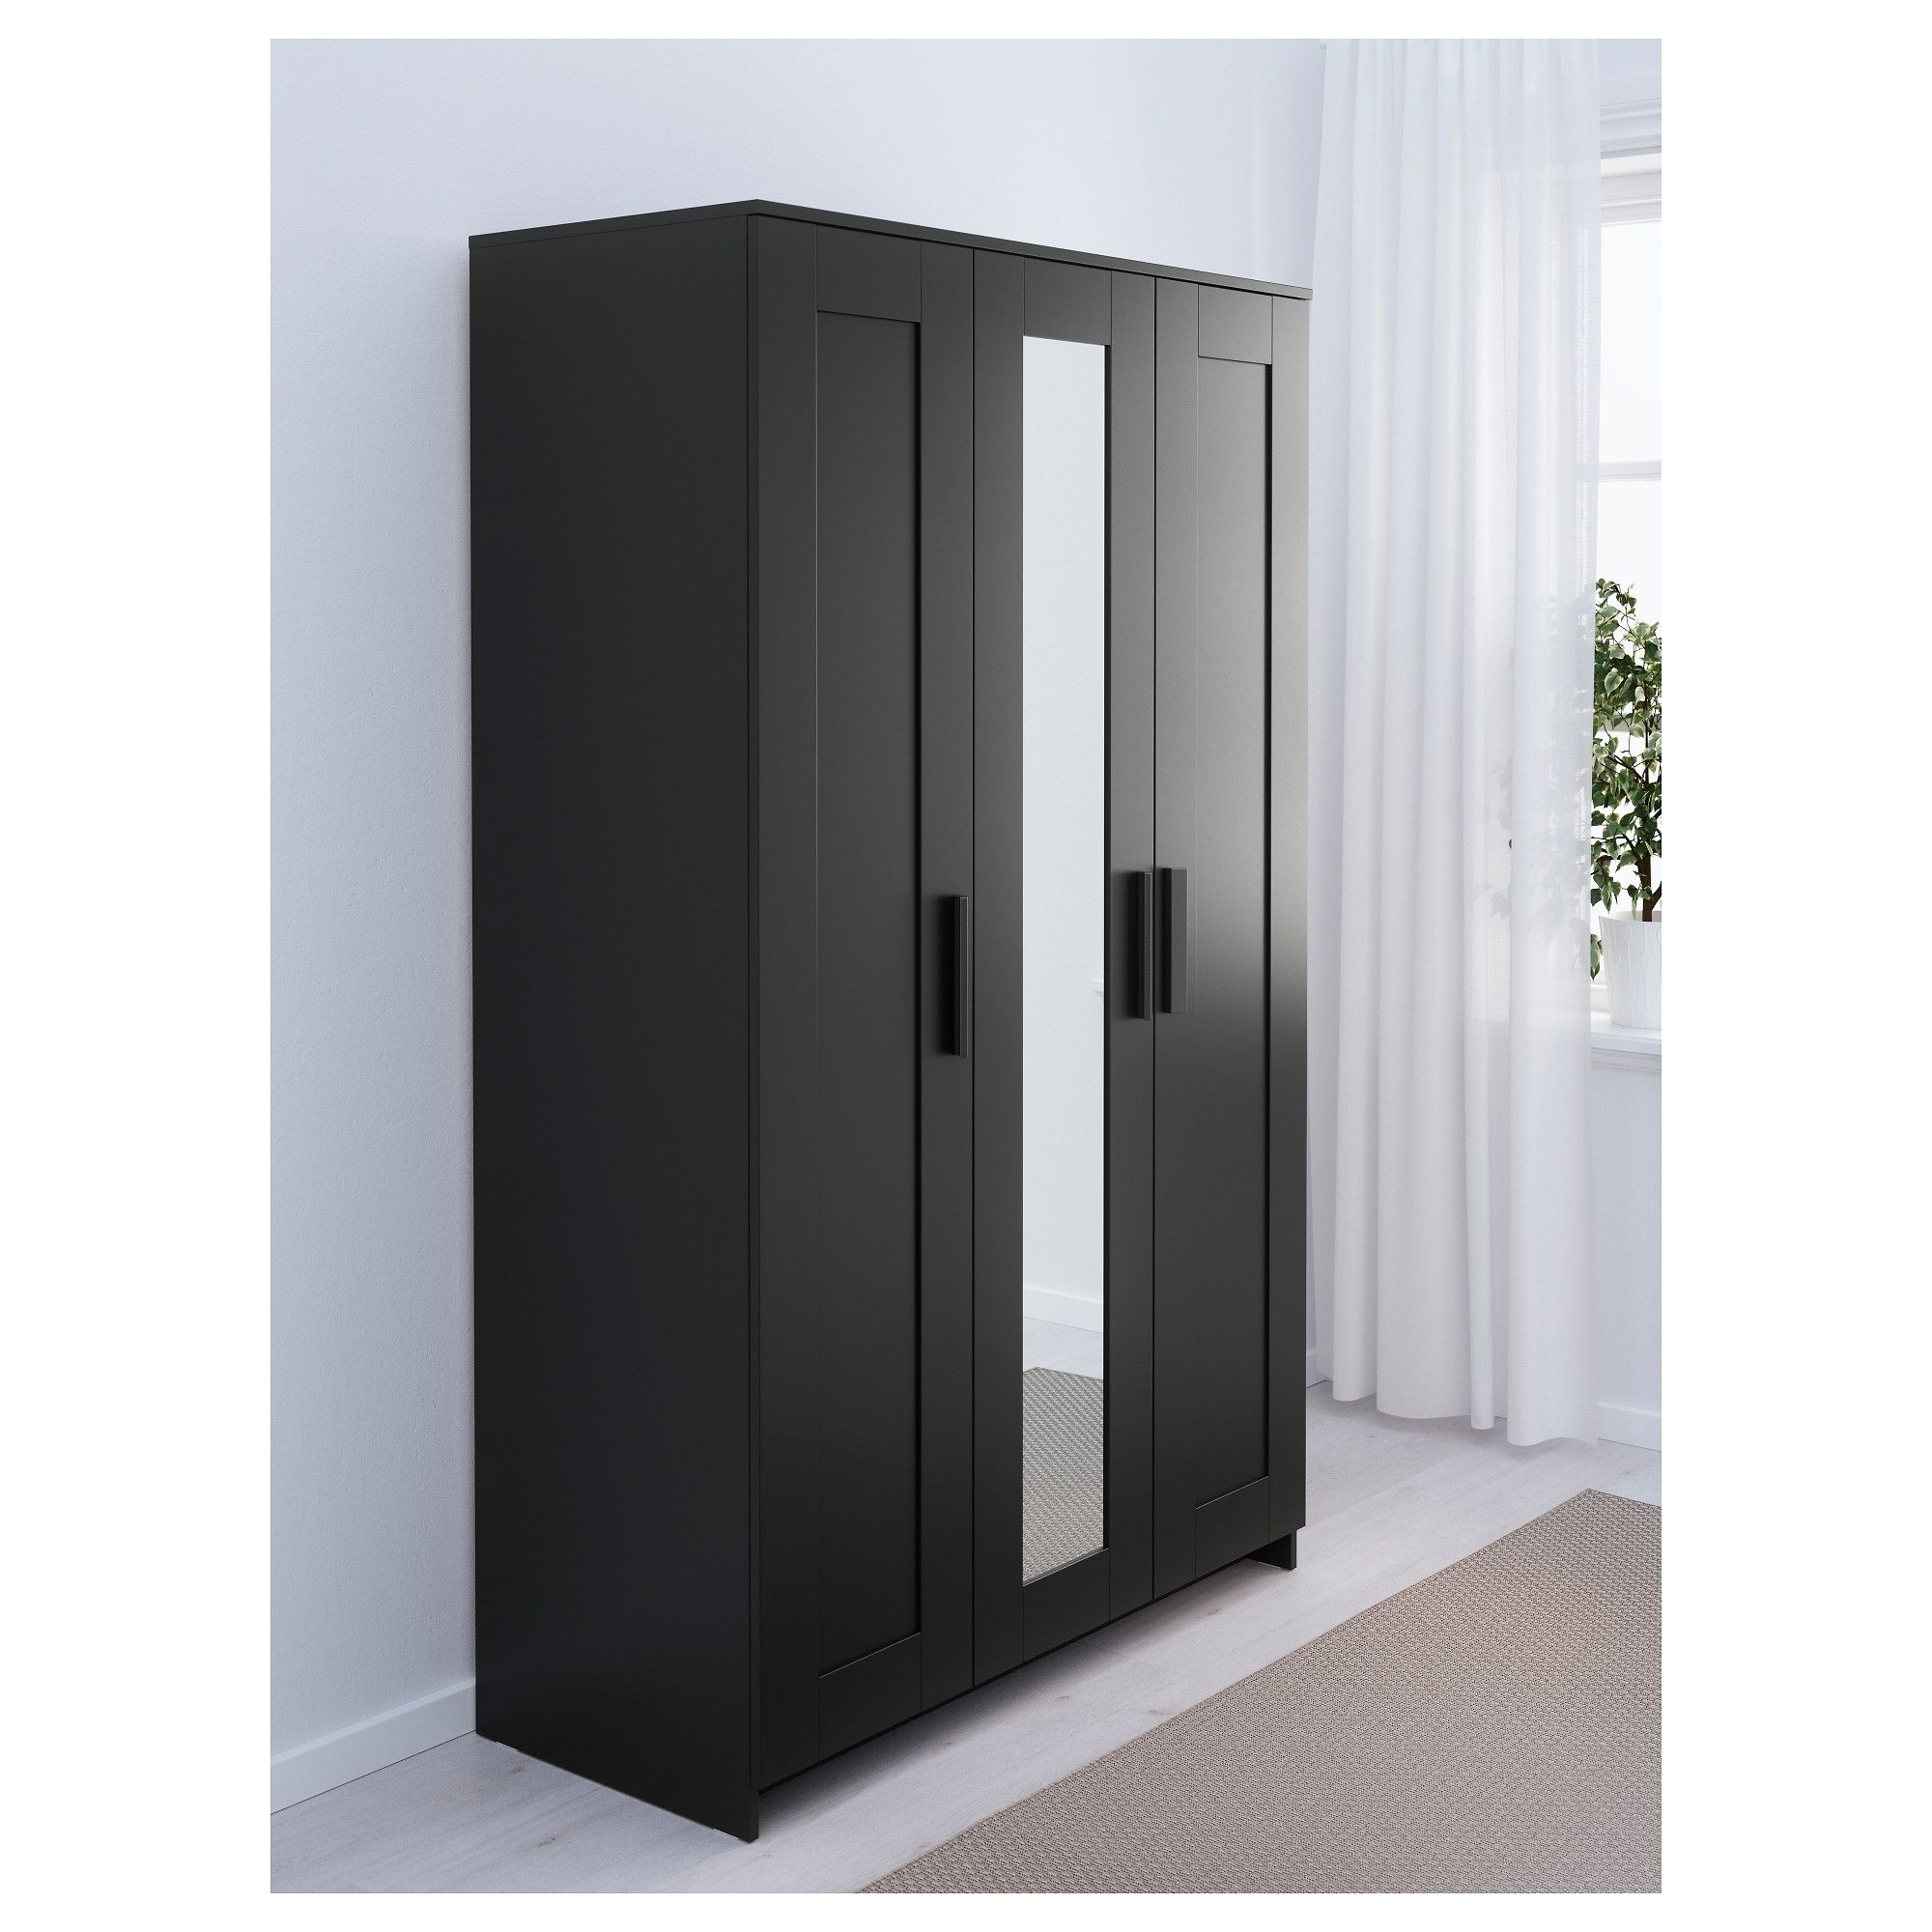 Widely Used Black 3 Door Wardrobes Throughout Brimnes Wardrobe With 3 Doors – White – Ikea (View 3 of 15)